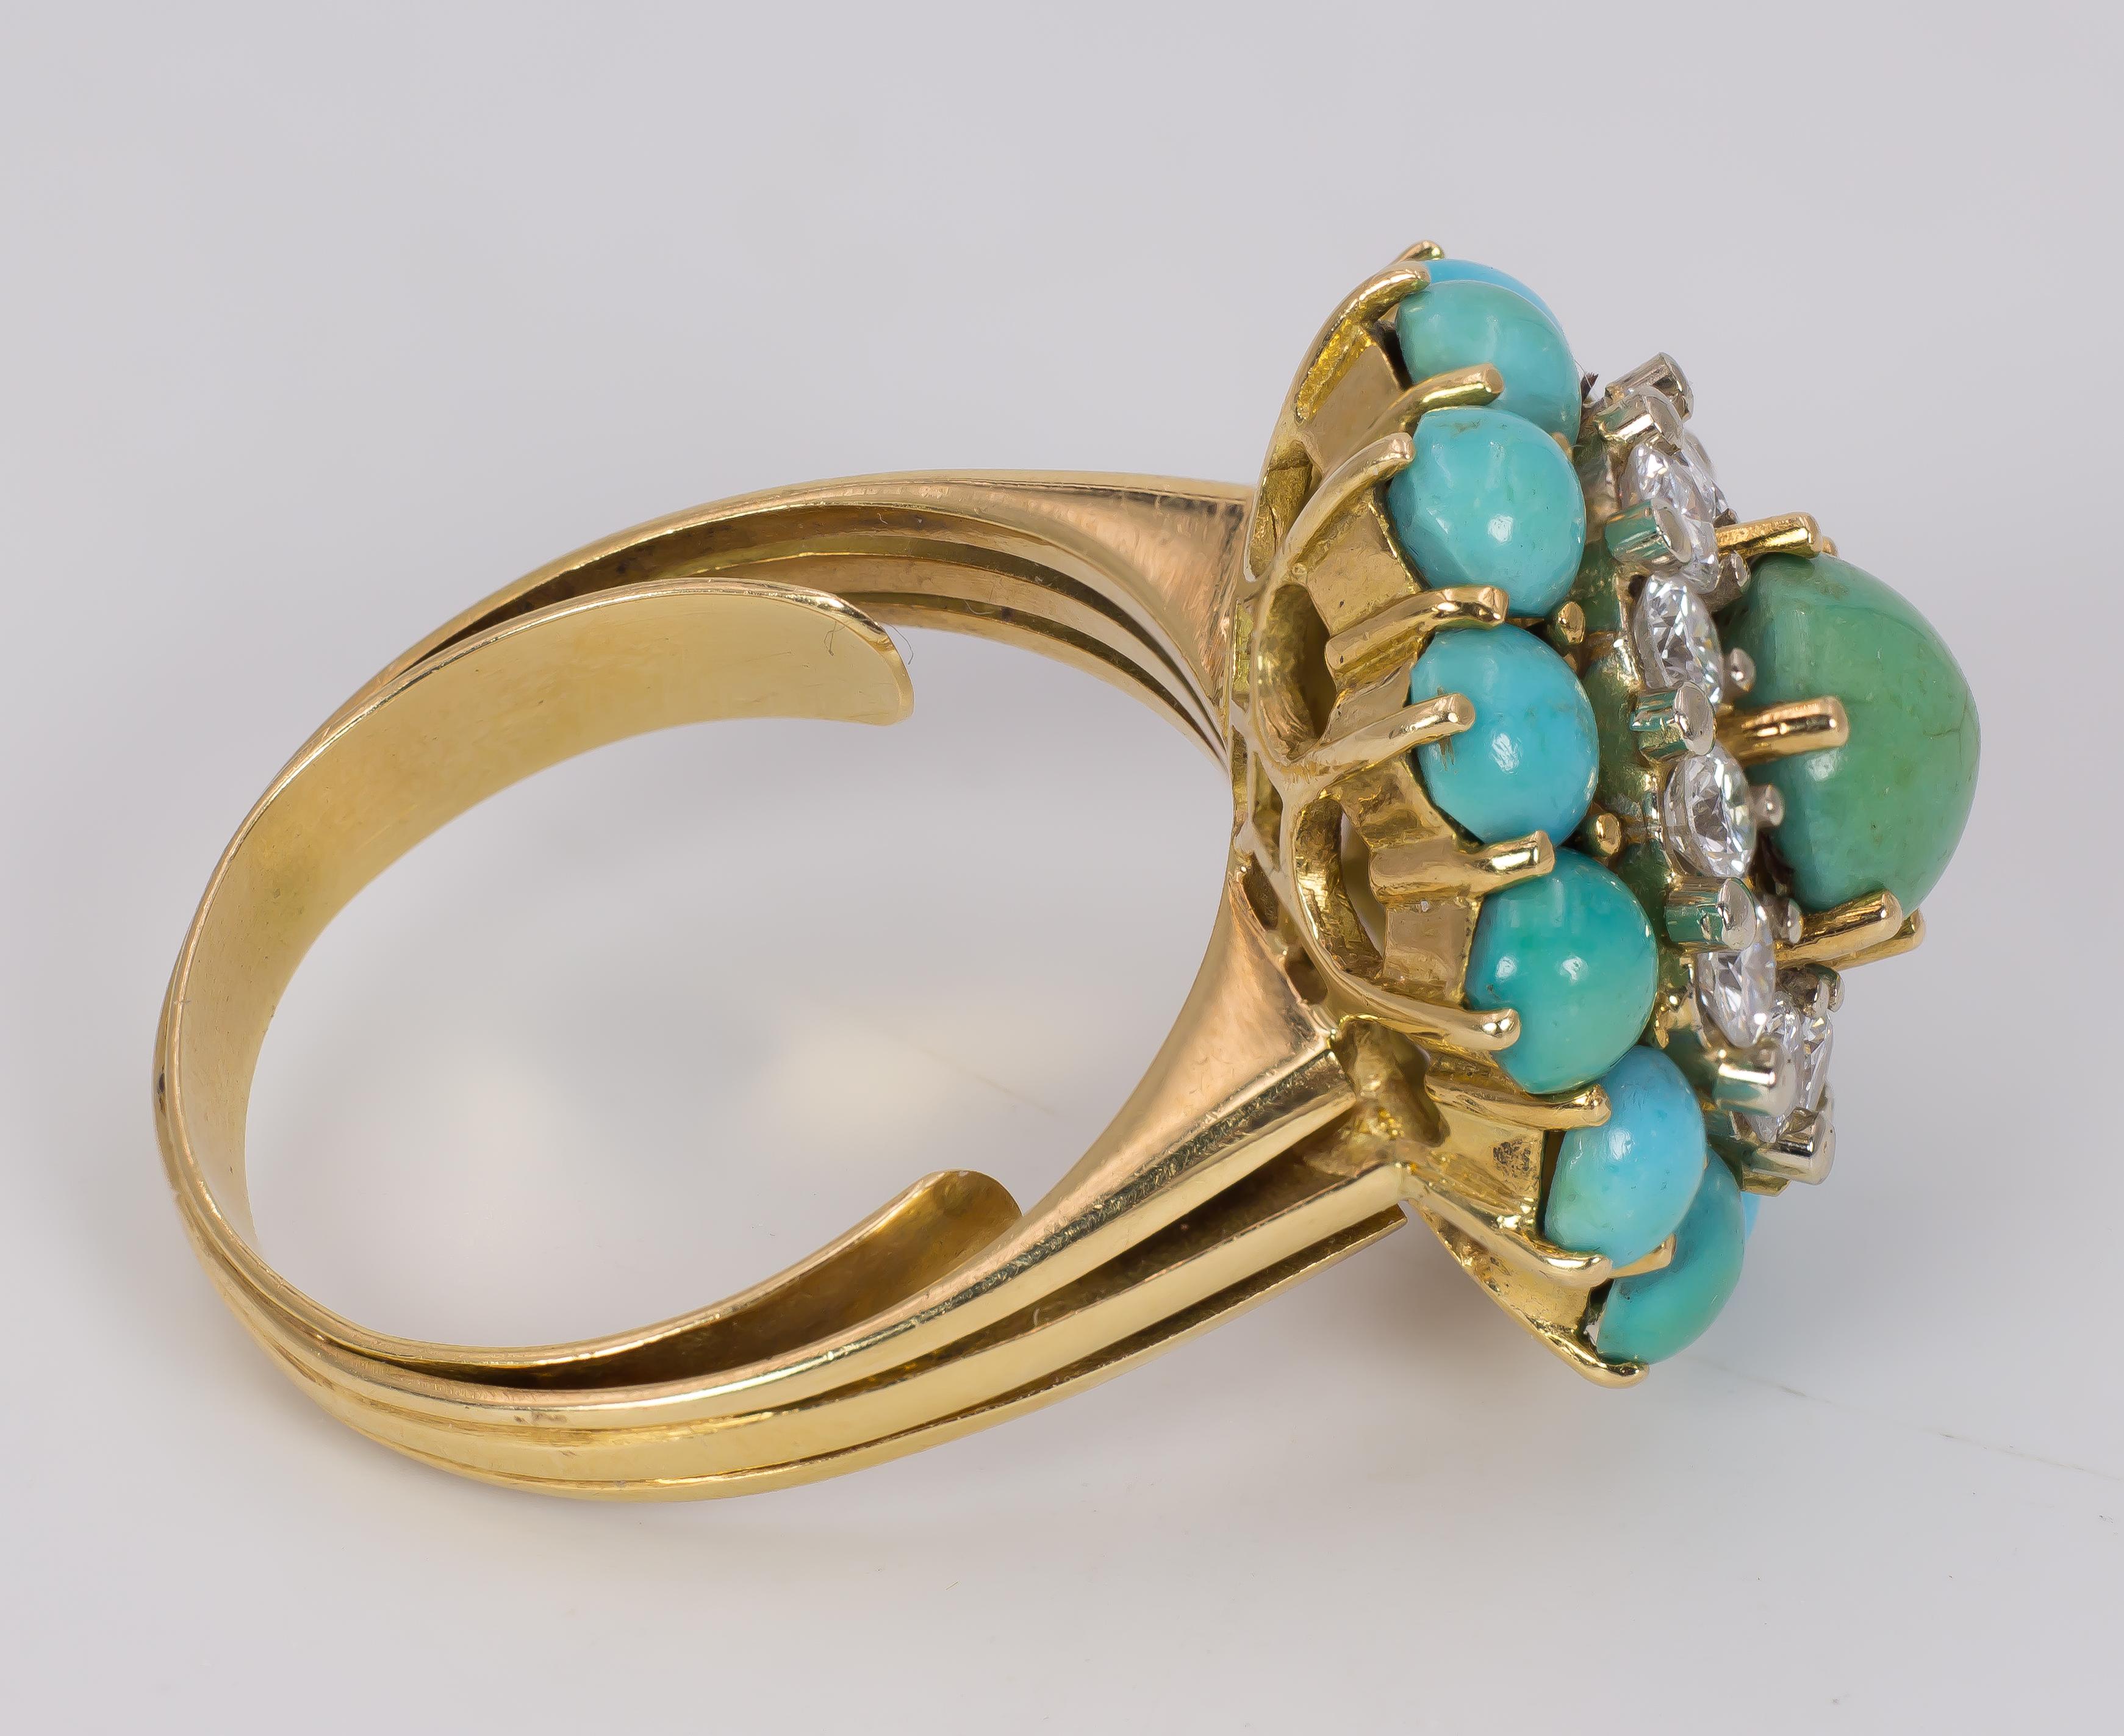 Round Cut Vintage 18 Karat Gold, 1.2 Carat Diamond and Turquoise Ring, 1960s For Sale